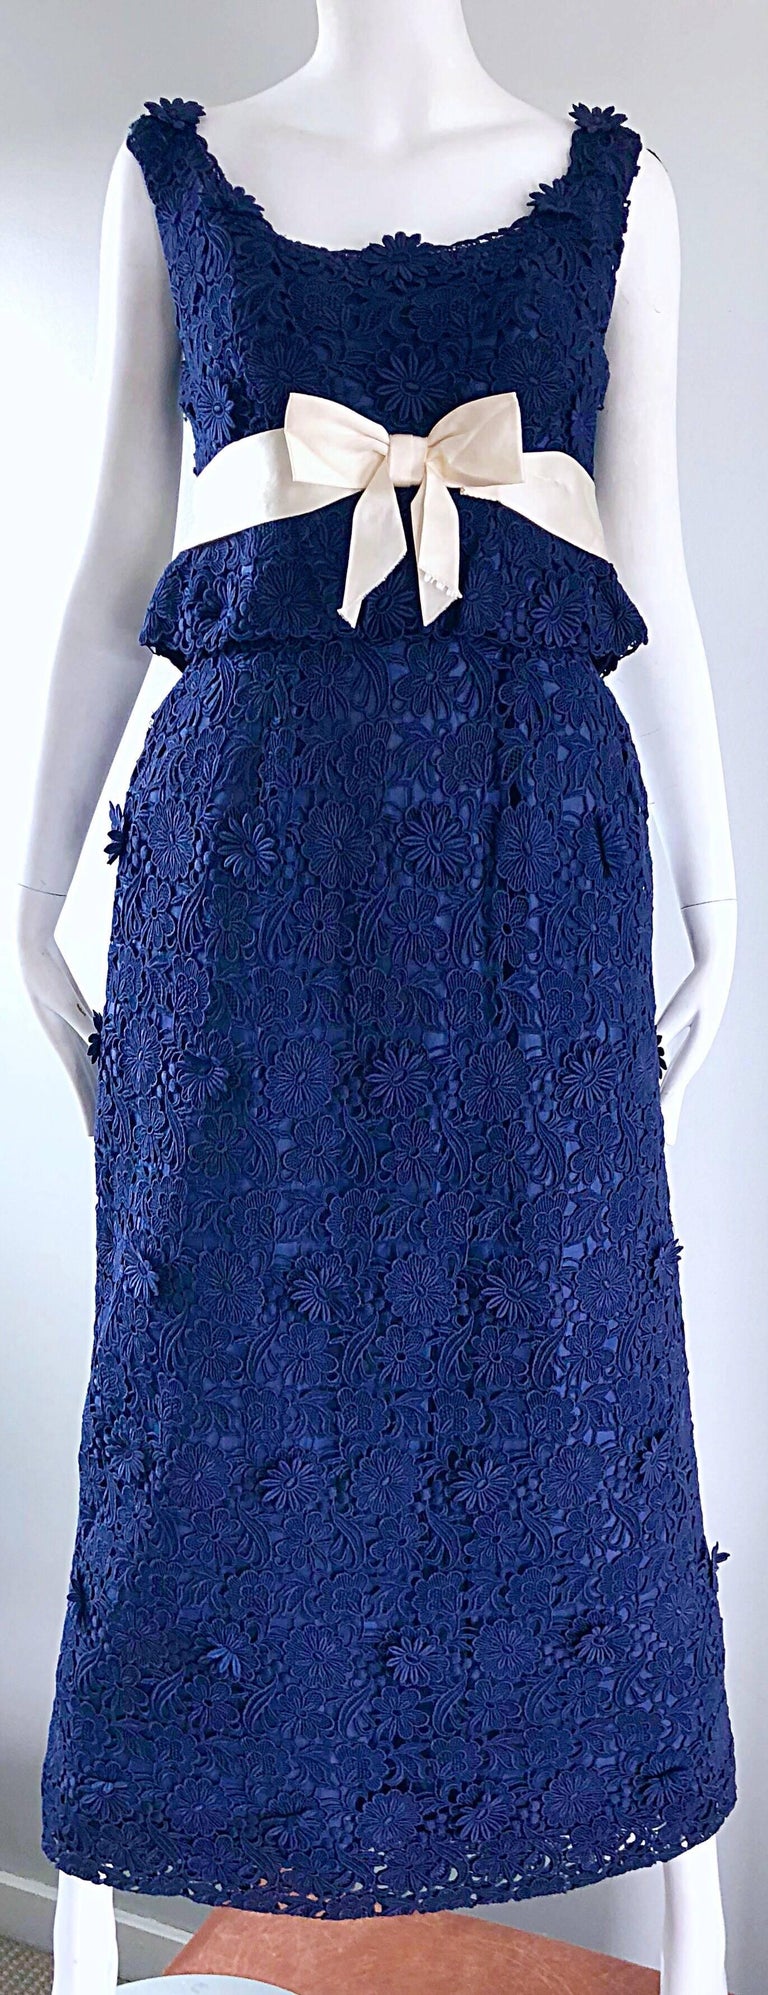 Bob Bugnand Couture 1960s Navy Blue Crochet Lace Vintage 60s Belted Gown For Sale 4